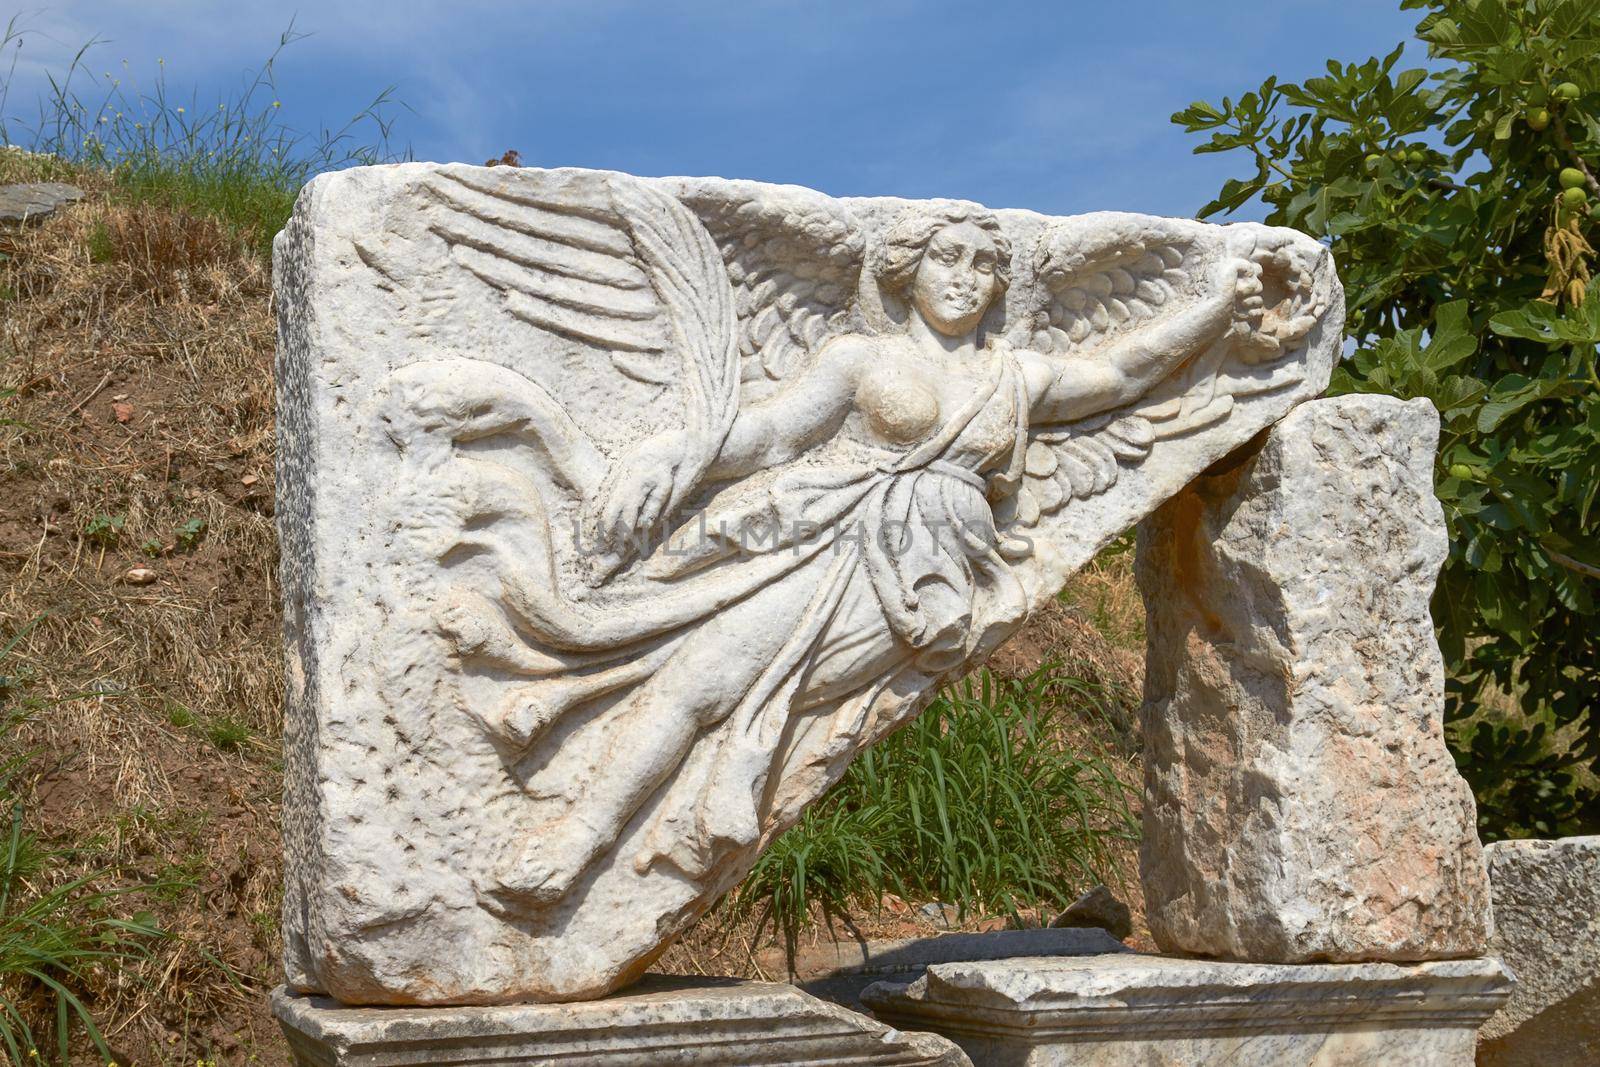 Stone Carving of the Goddess Nike in Ancient Ephesus Turkey. She is the Goddess of Victory in Greek Mythology.